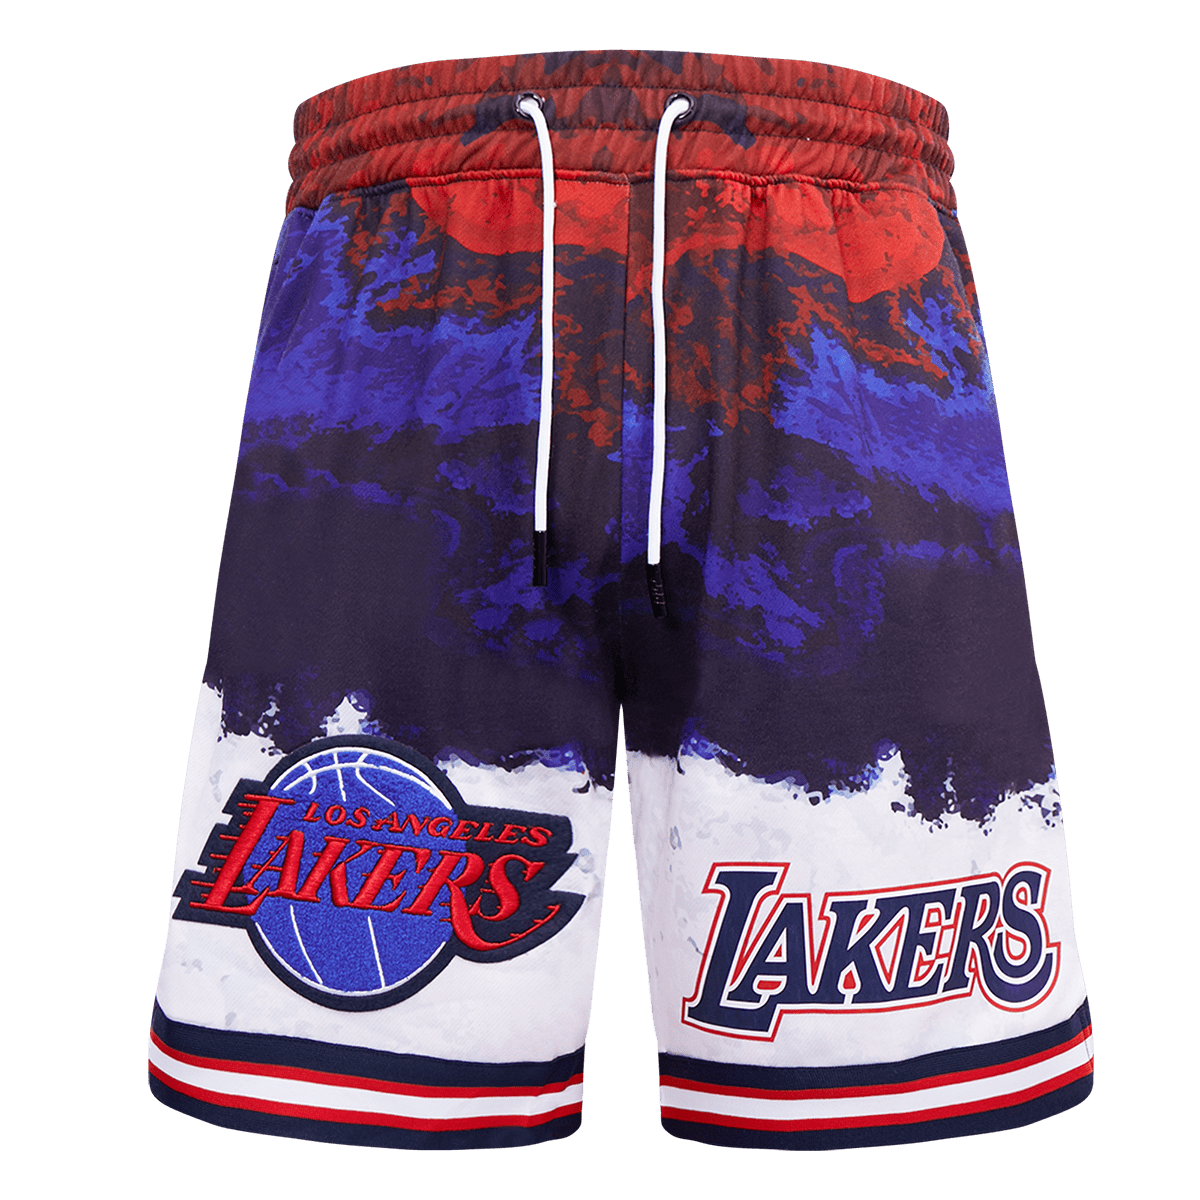 Shop Pro Standard Los Angeles Lakers Pro Team Shorts BLL351639-YLW yellow